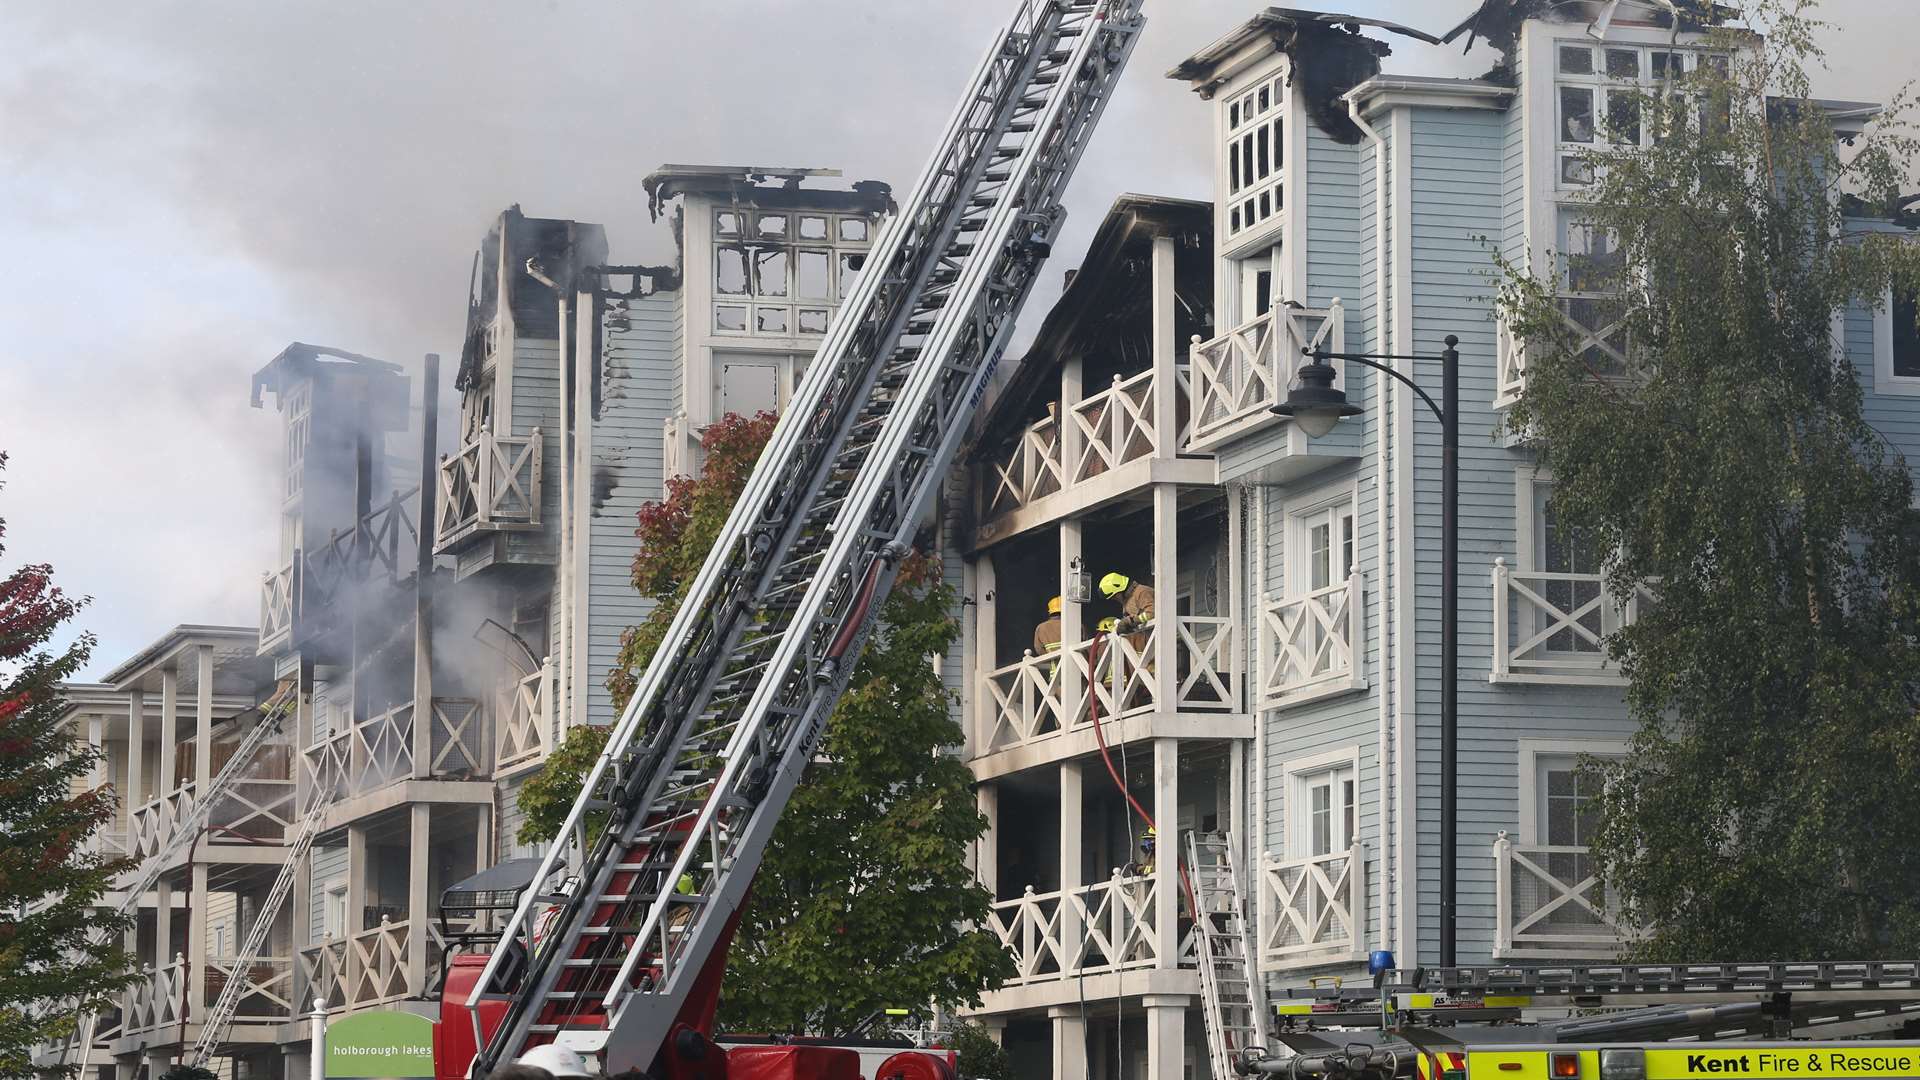 A JustGiving page has been set up to help those who have lost everything in the fire. Picture: John Westhrop